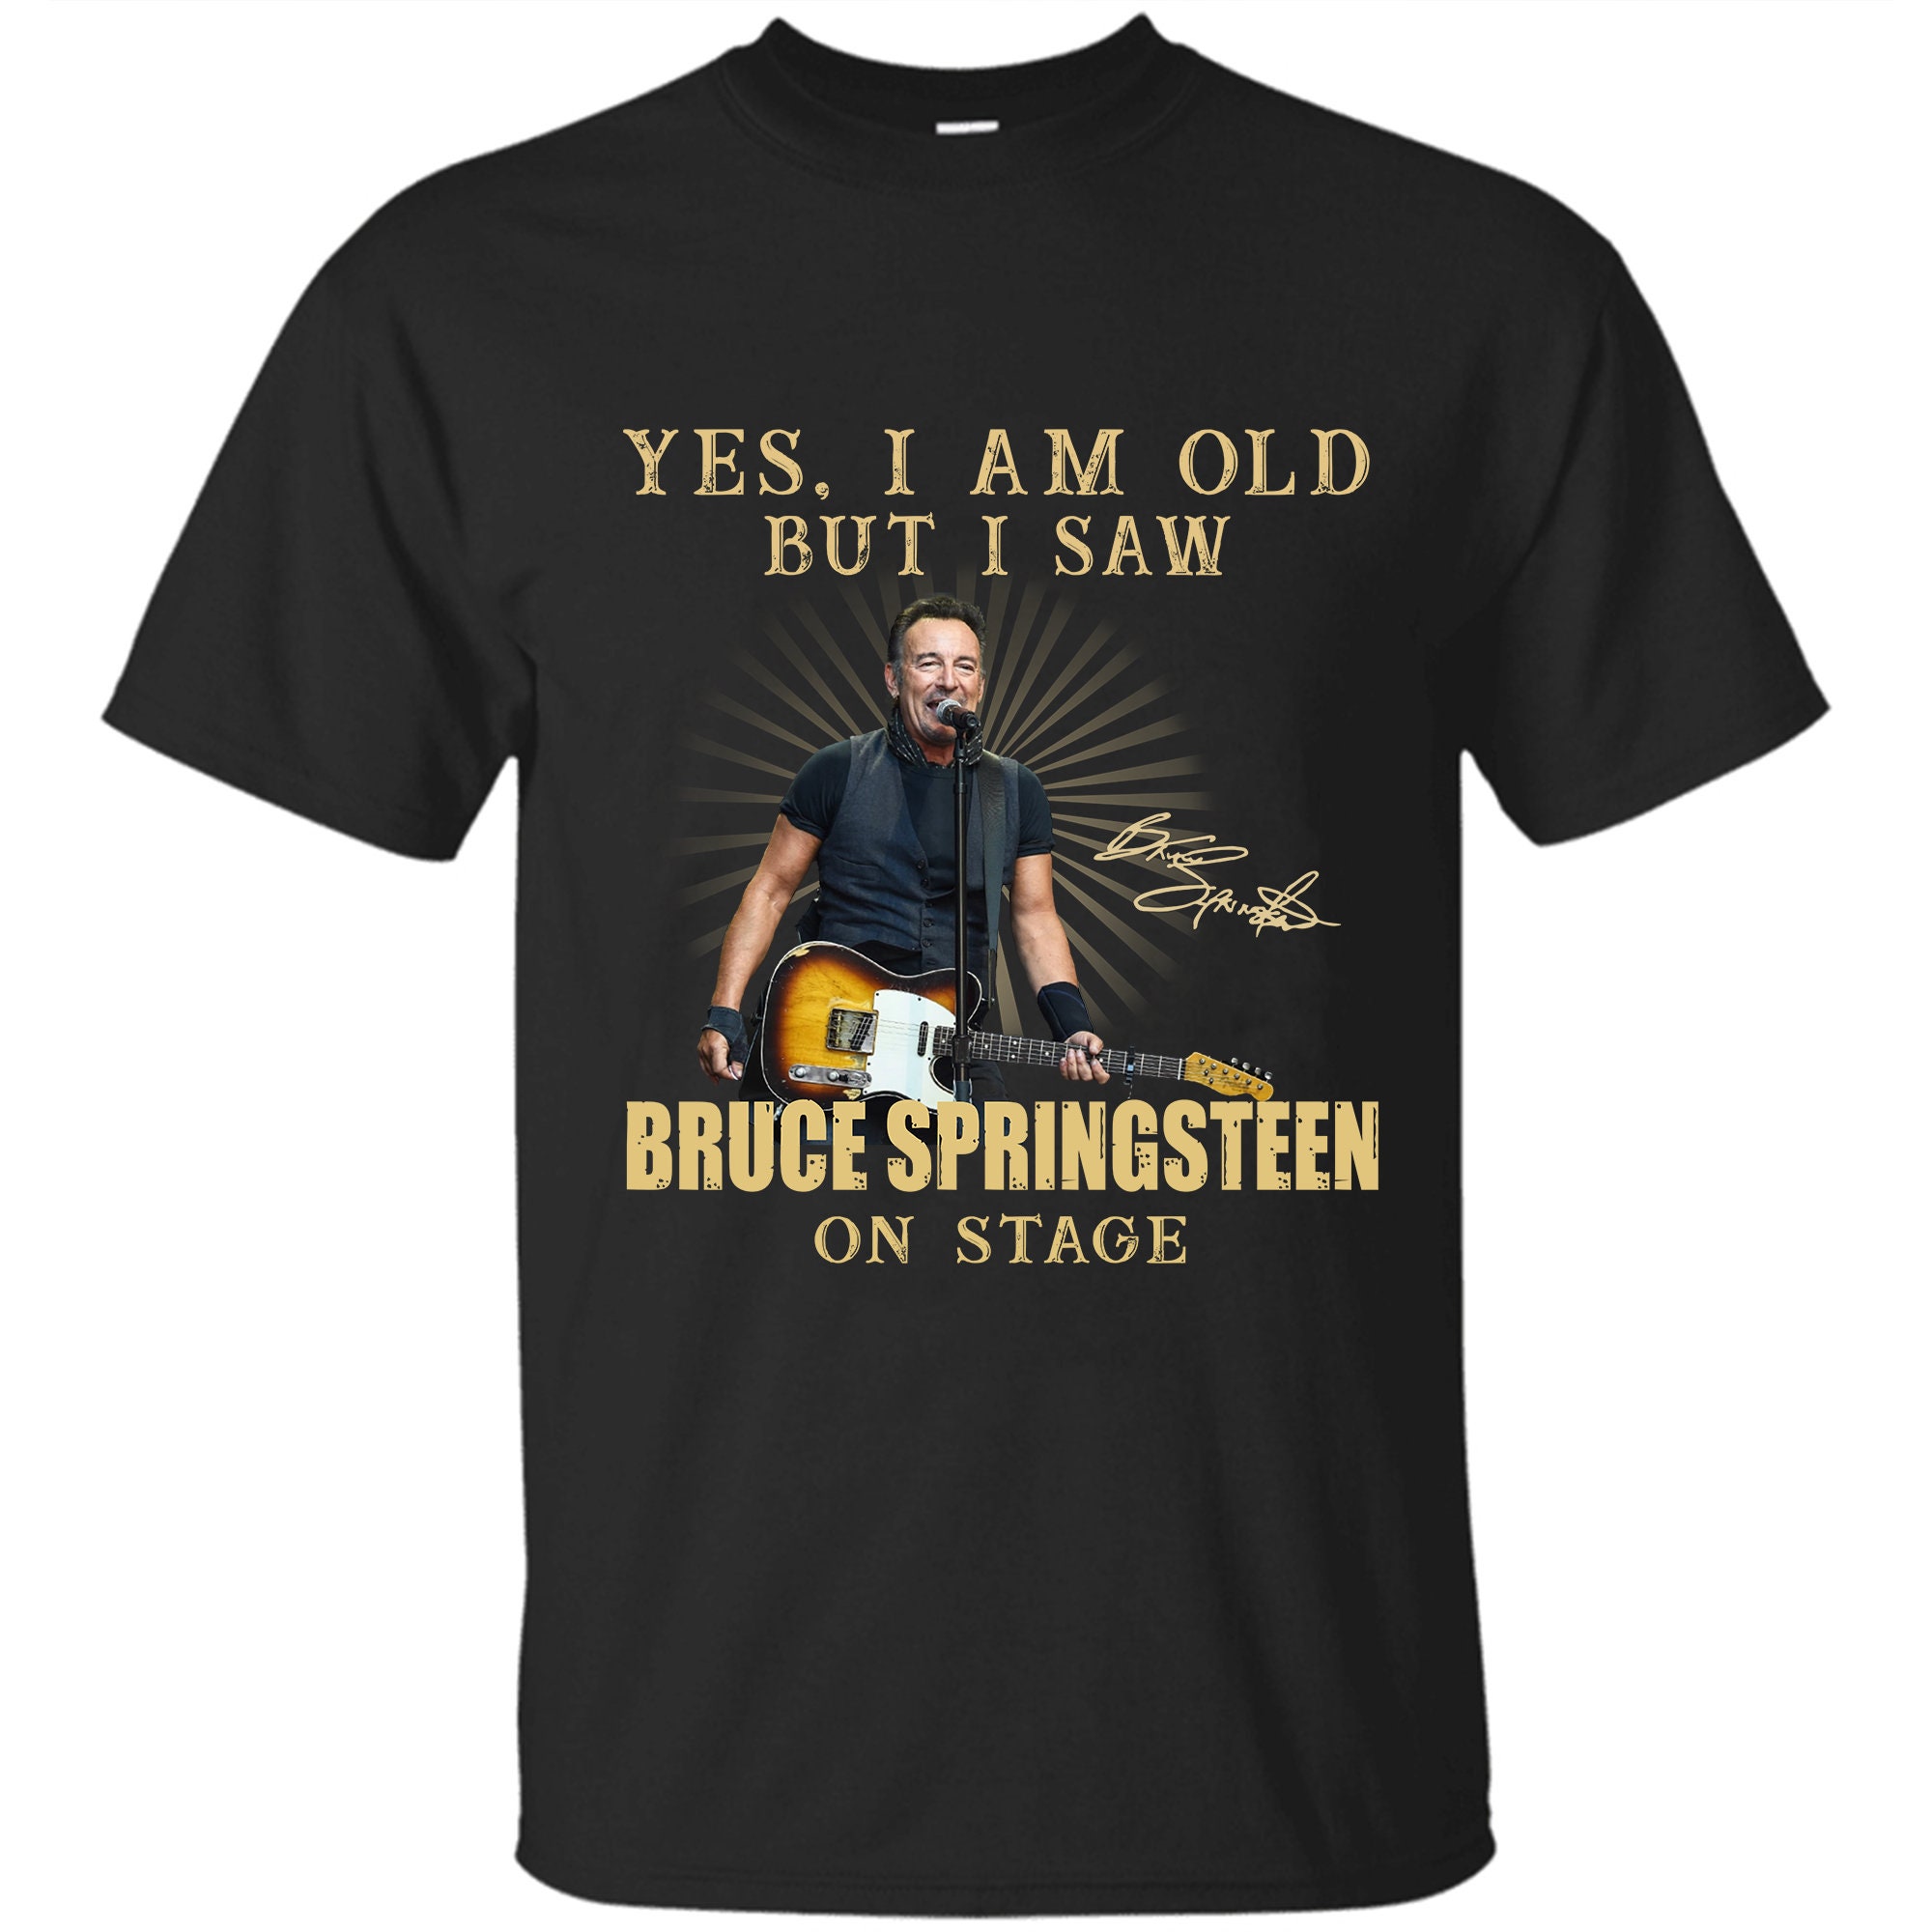 Discover Yes, I Am Old But I Saw Bruce Springsteen On Stage T-Shirt, Bruce Springsteen UK Tour 2023